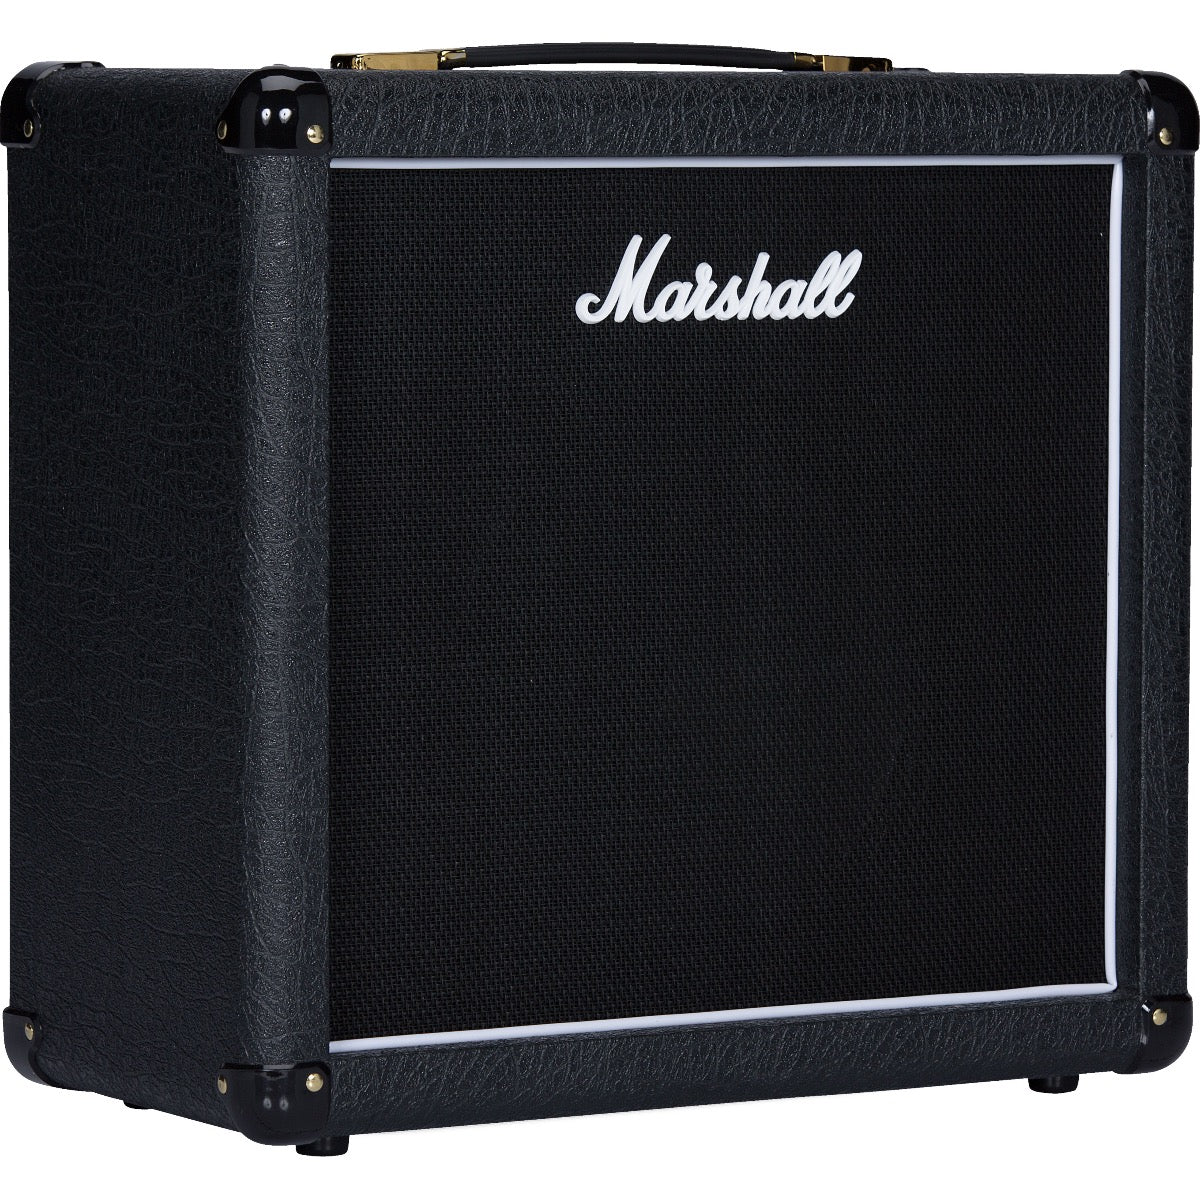 Perspective view of Marshall SC112 Studio Classic 1x12 Speaker Cabinet showing front and left side